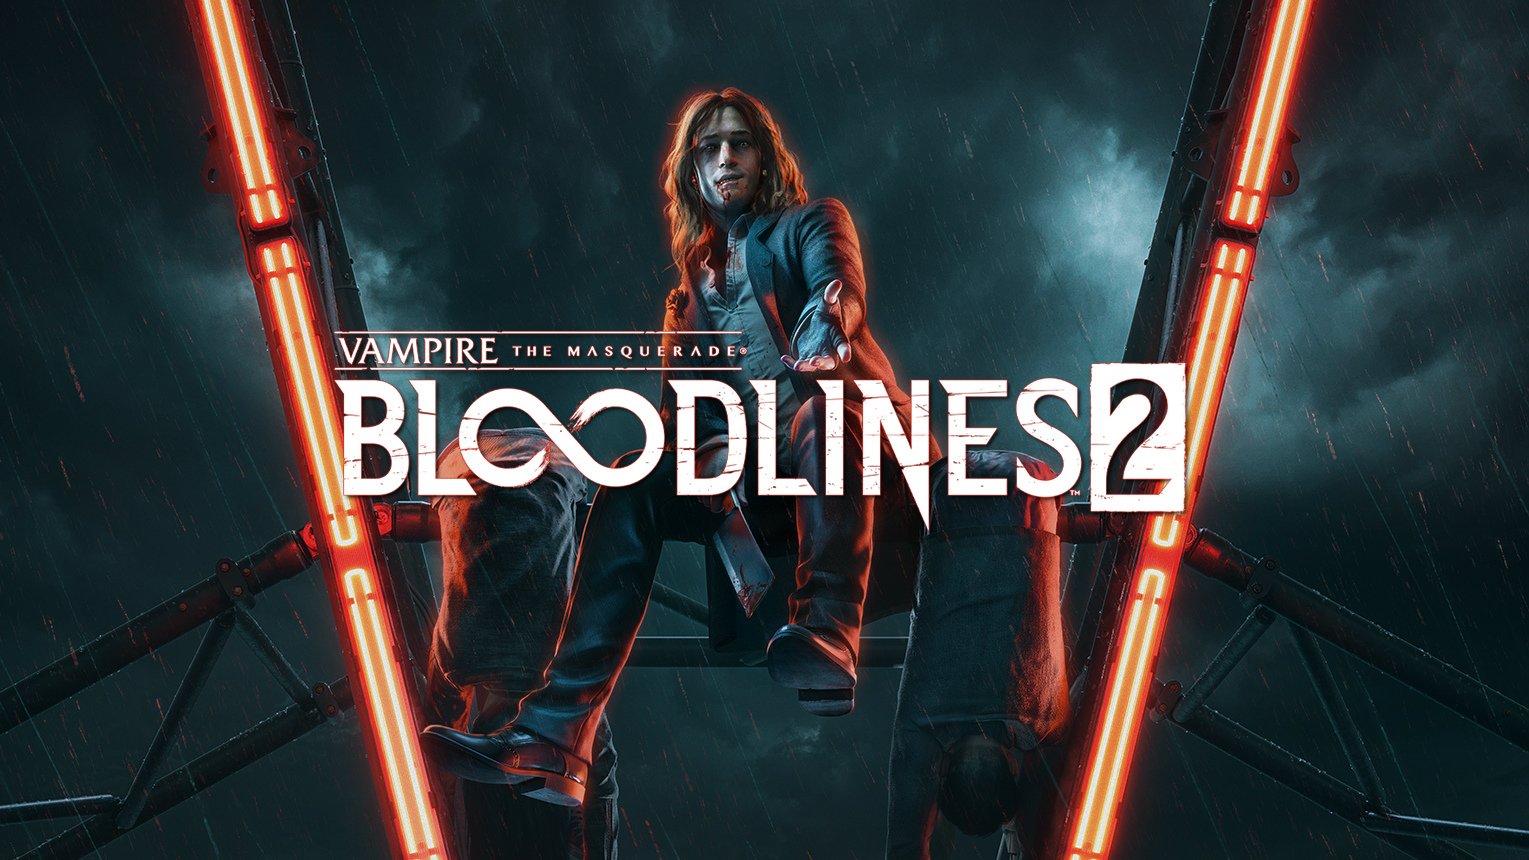 Vampire: The Masquerade Bloodlines 2 - everything we know